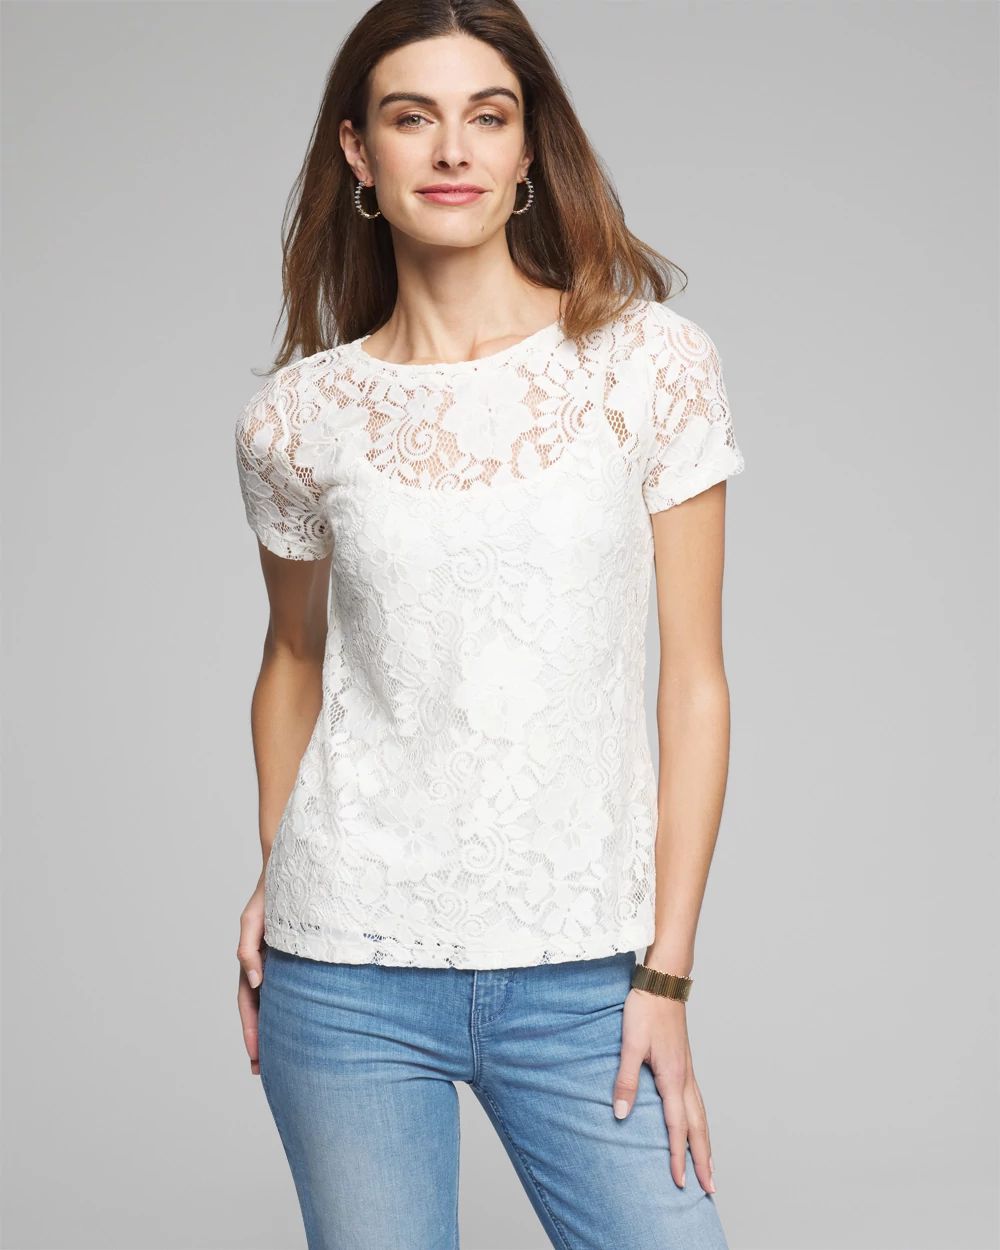 Outlet WHBM Short Sleeve Lace Top